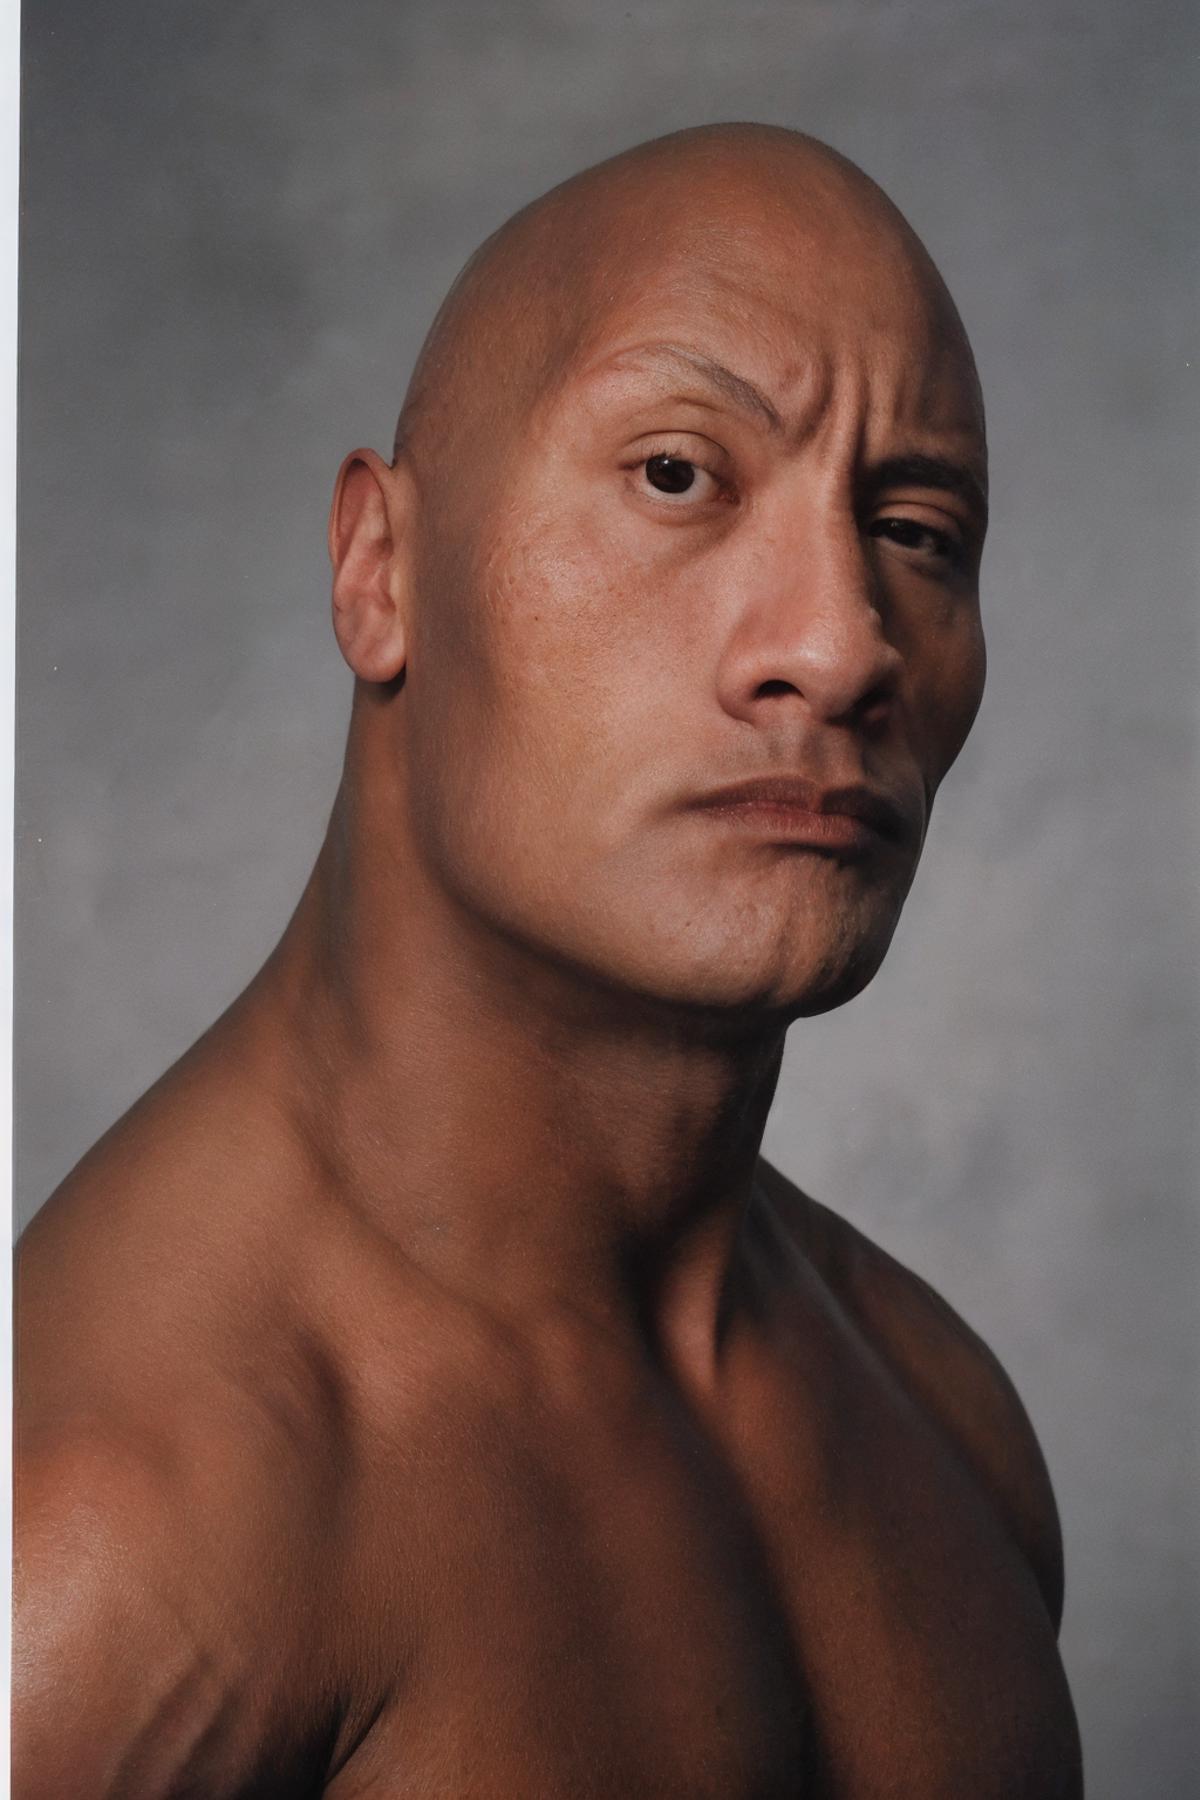 The Rock's Eyebrow Raise Meme | Concept LoRA image by SigmaMale